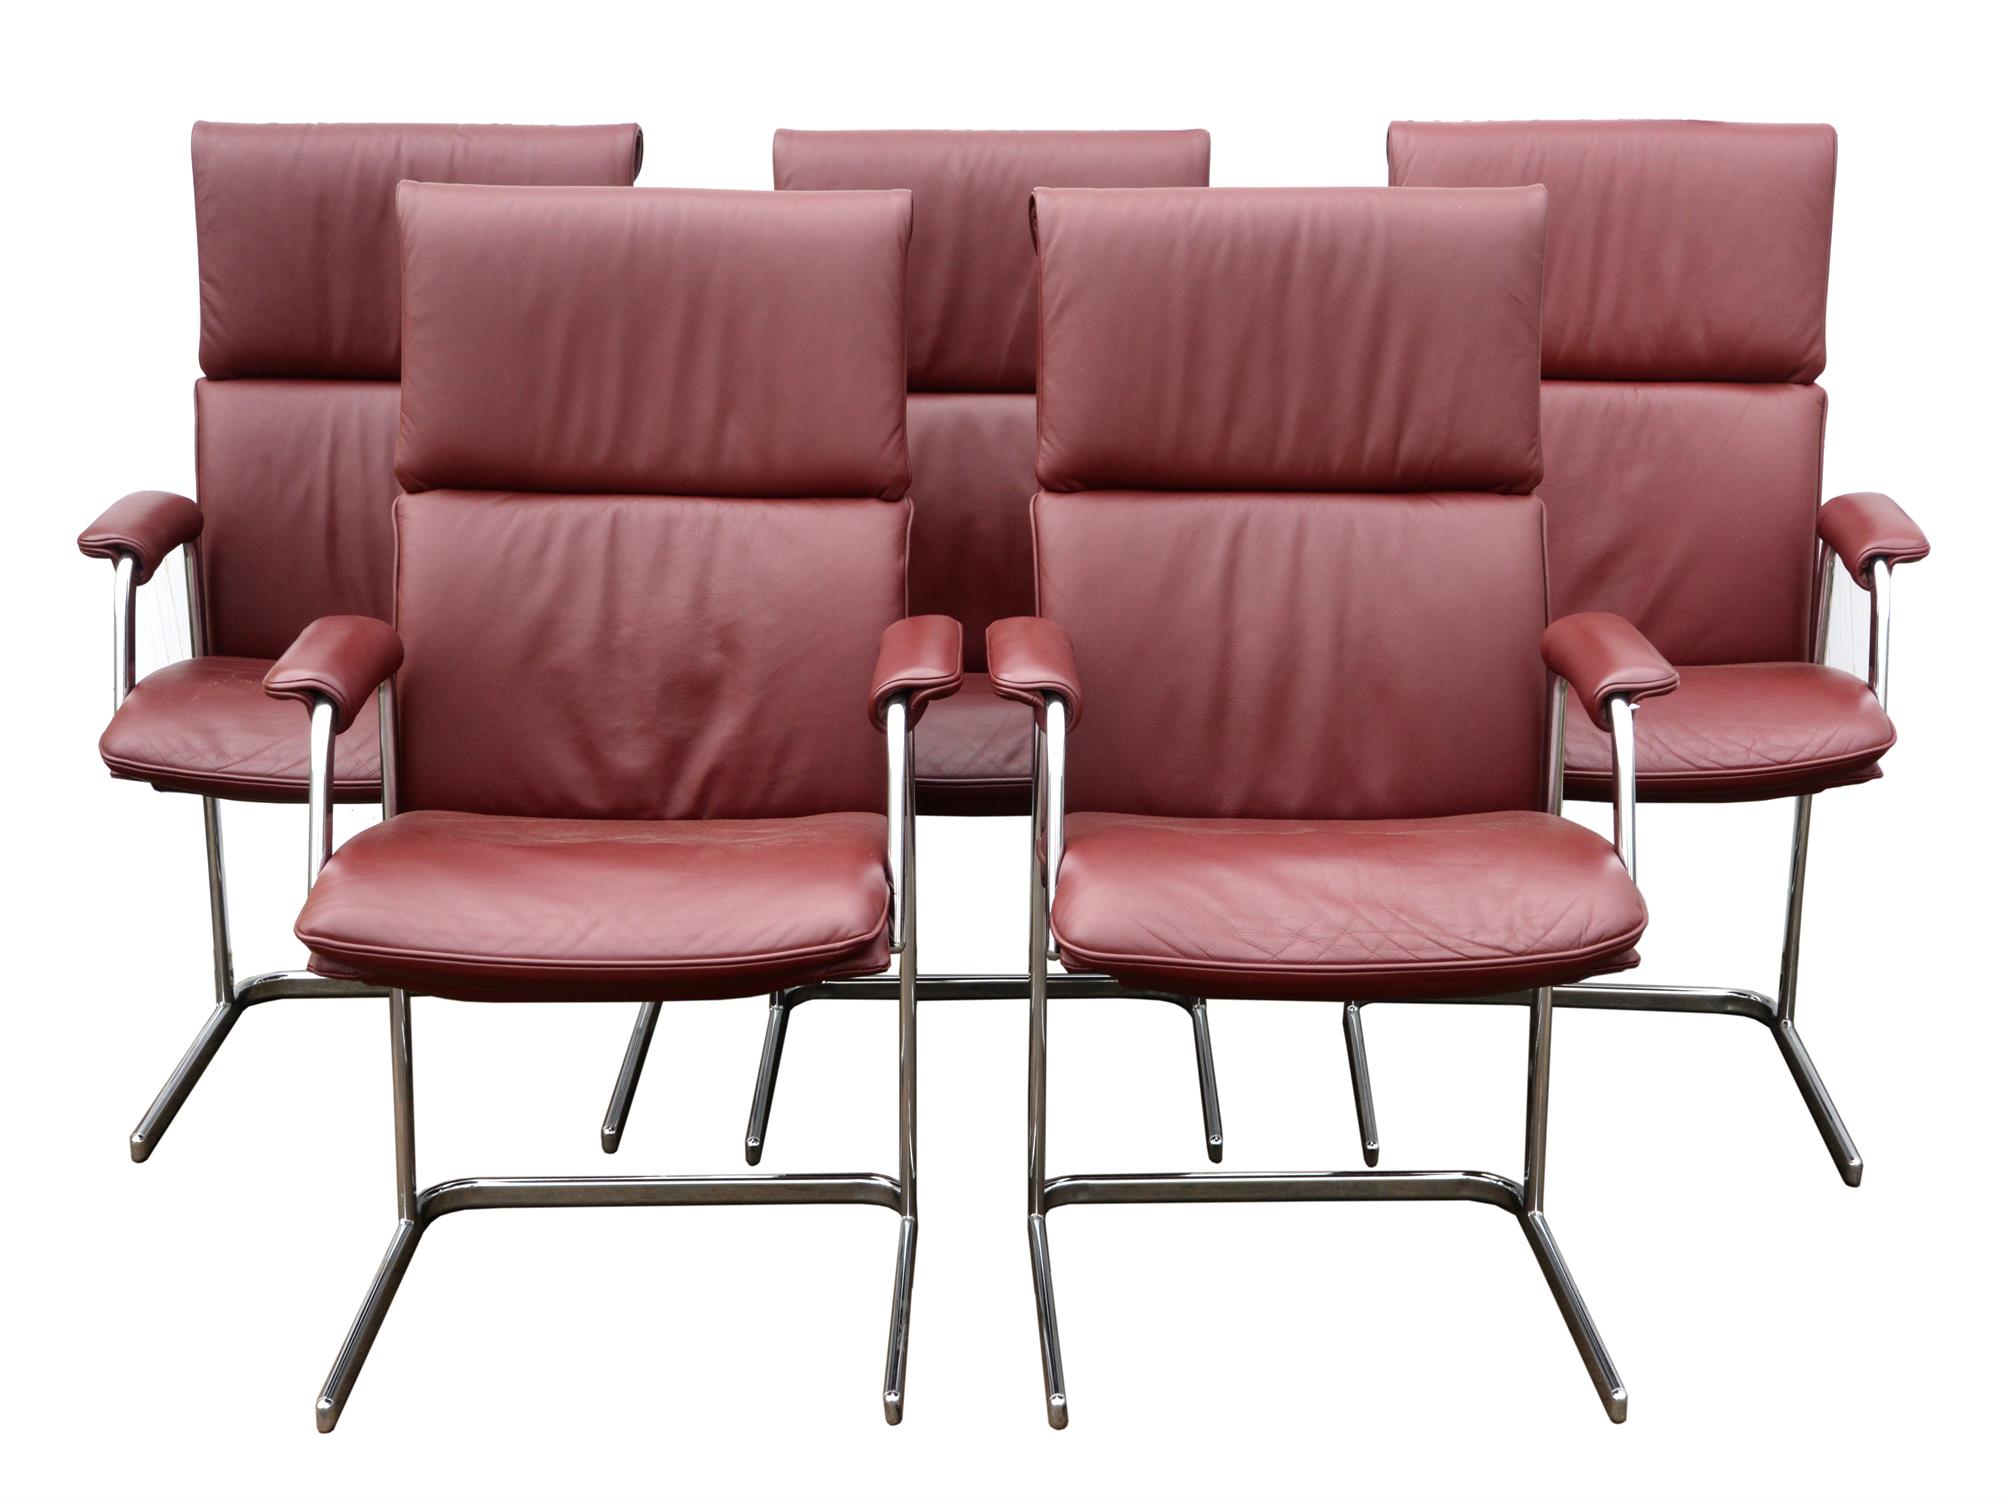 Boss, five executive armchairs, burgundy leather and chromed steel, 104cm high x 61cm wide x 69cm